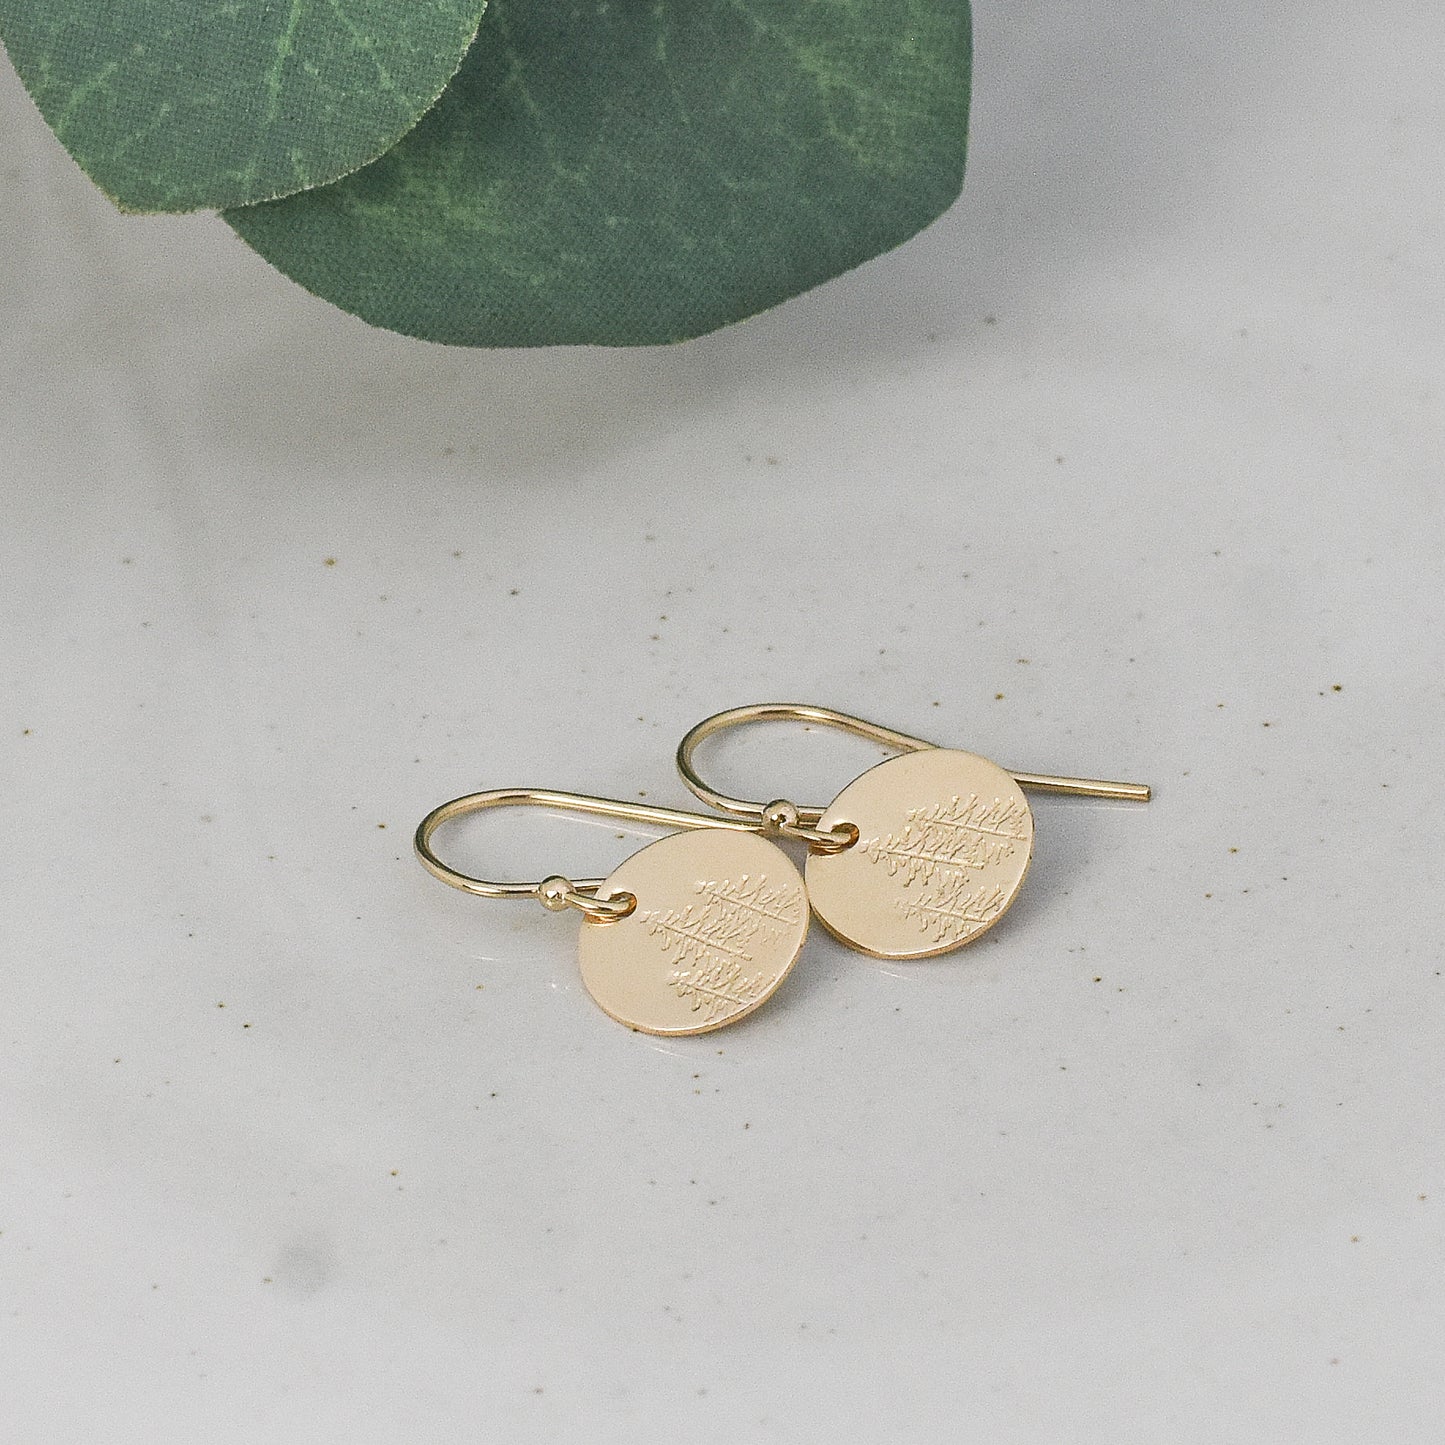 Evergreen Tree Earrings - Gold or Silver